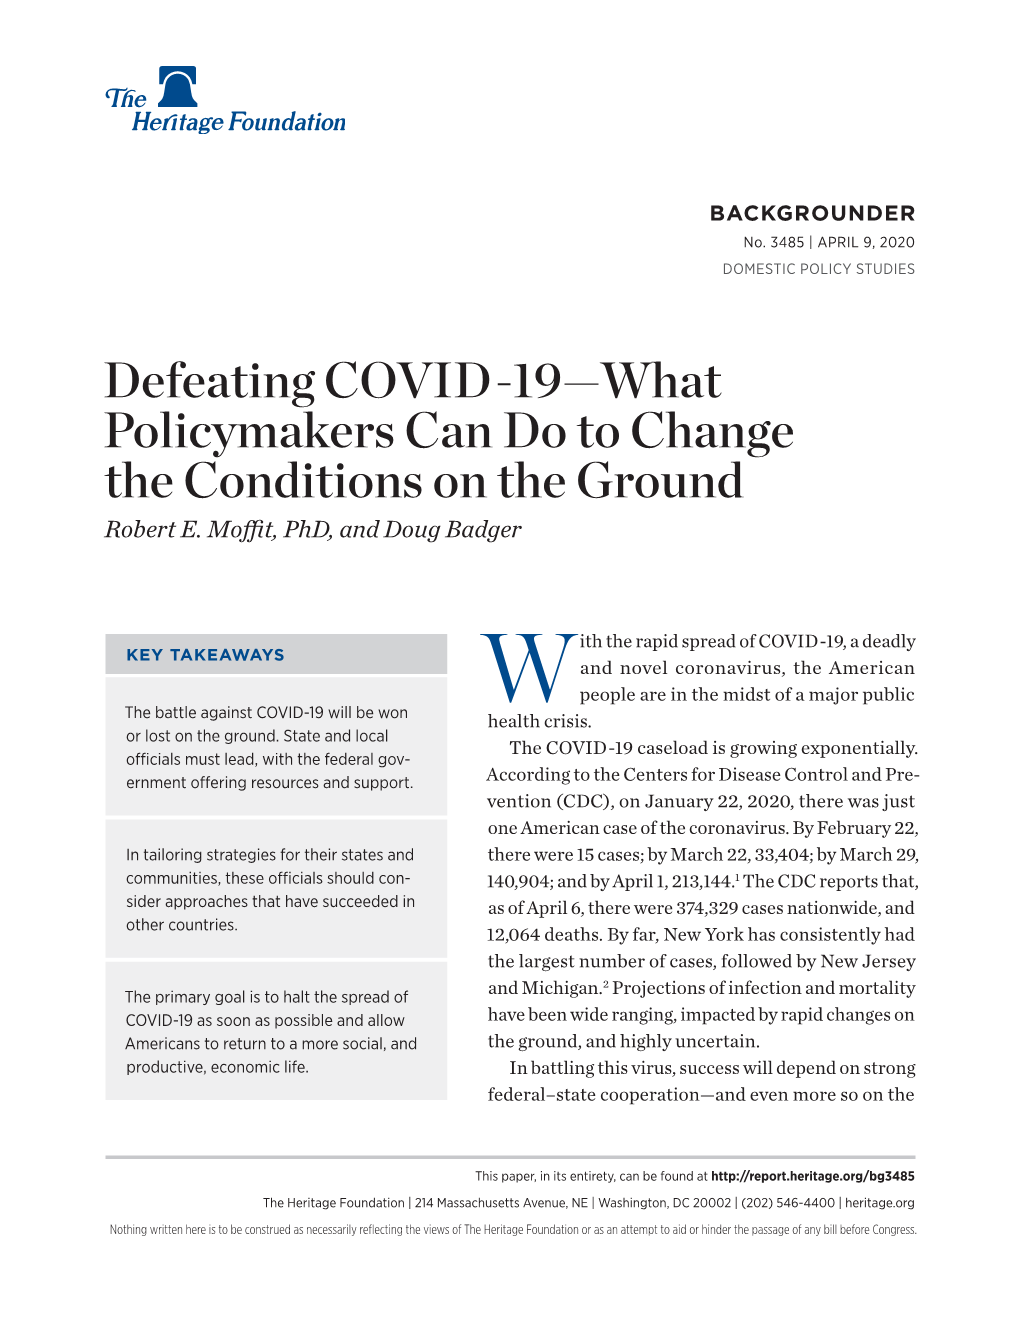 Defeating COVID-19—What Policymakers Can Do to Change the Conditions on the Ground Robert E